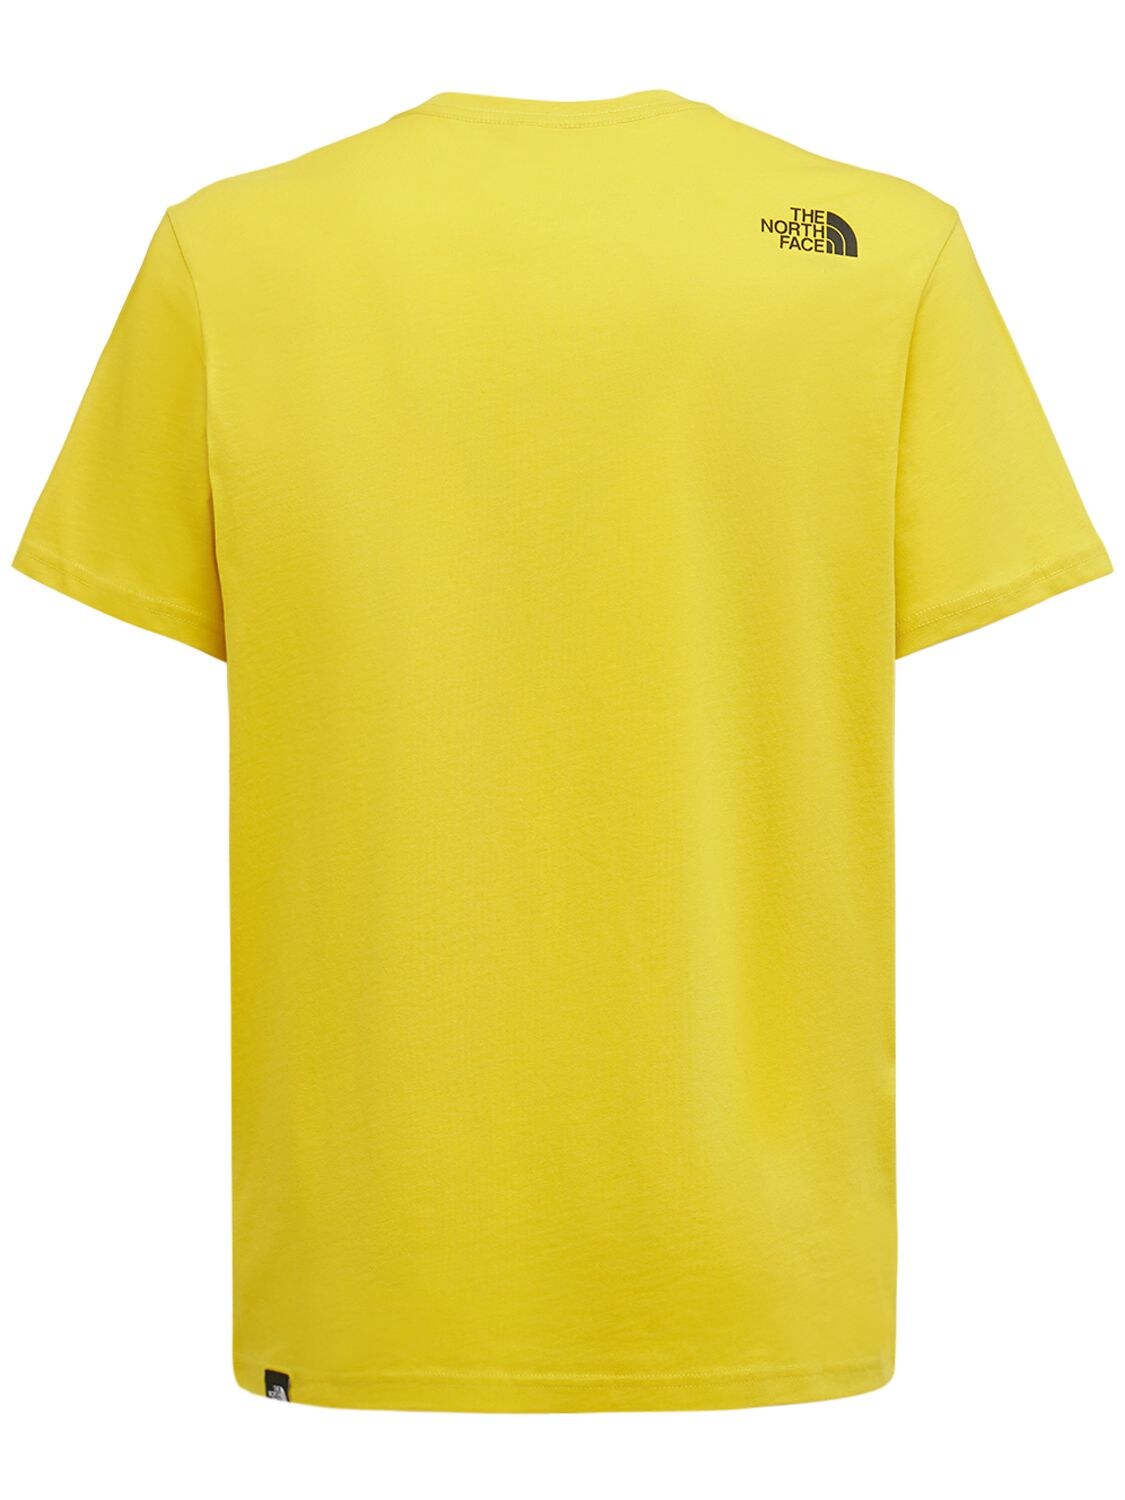 The North Face Fine Cotton T-shirt W/ Logo In Weeping Willow